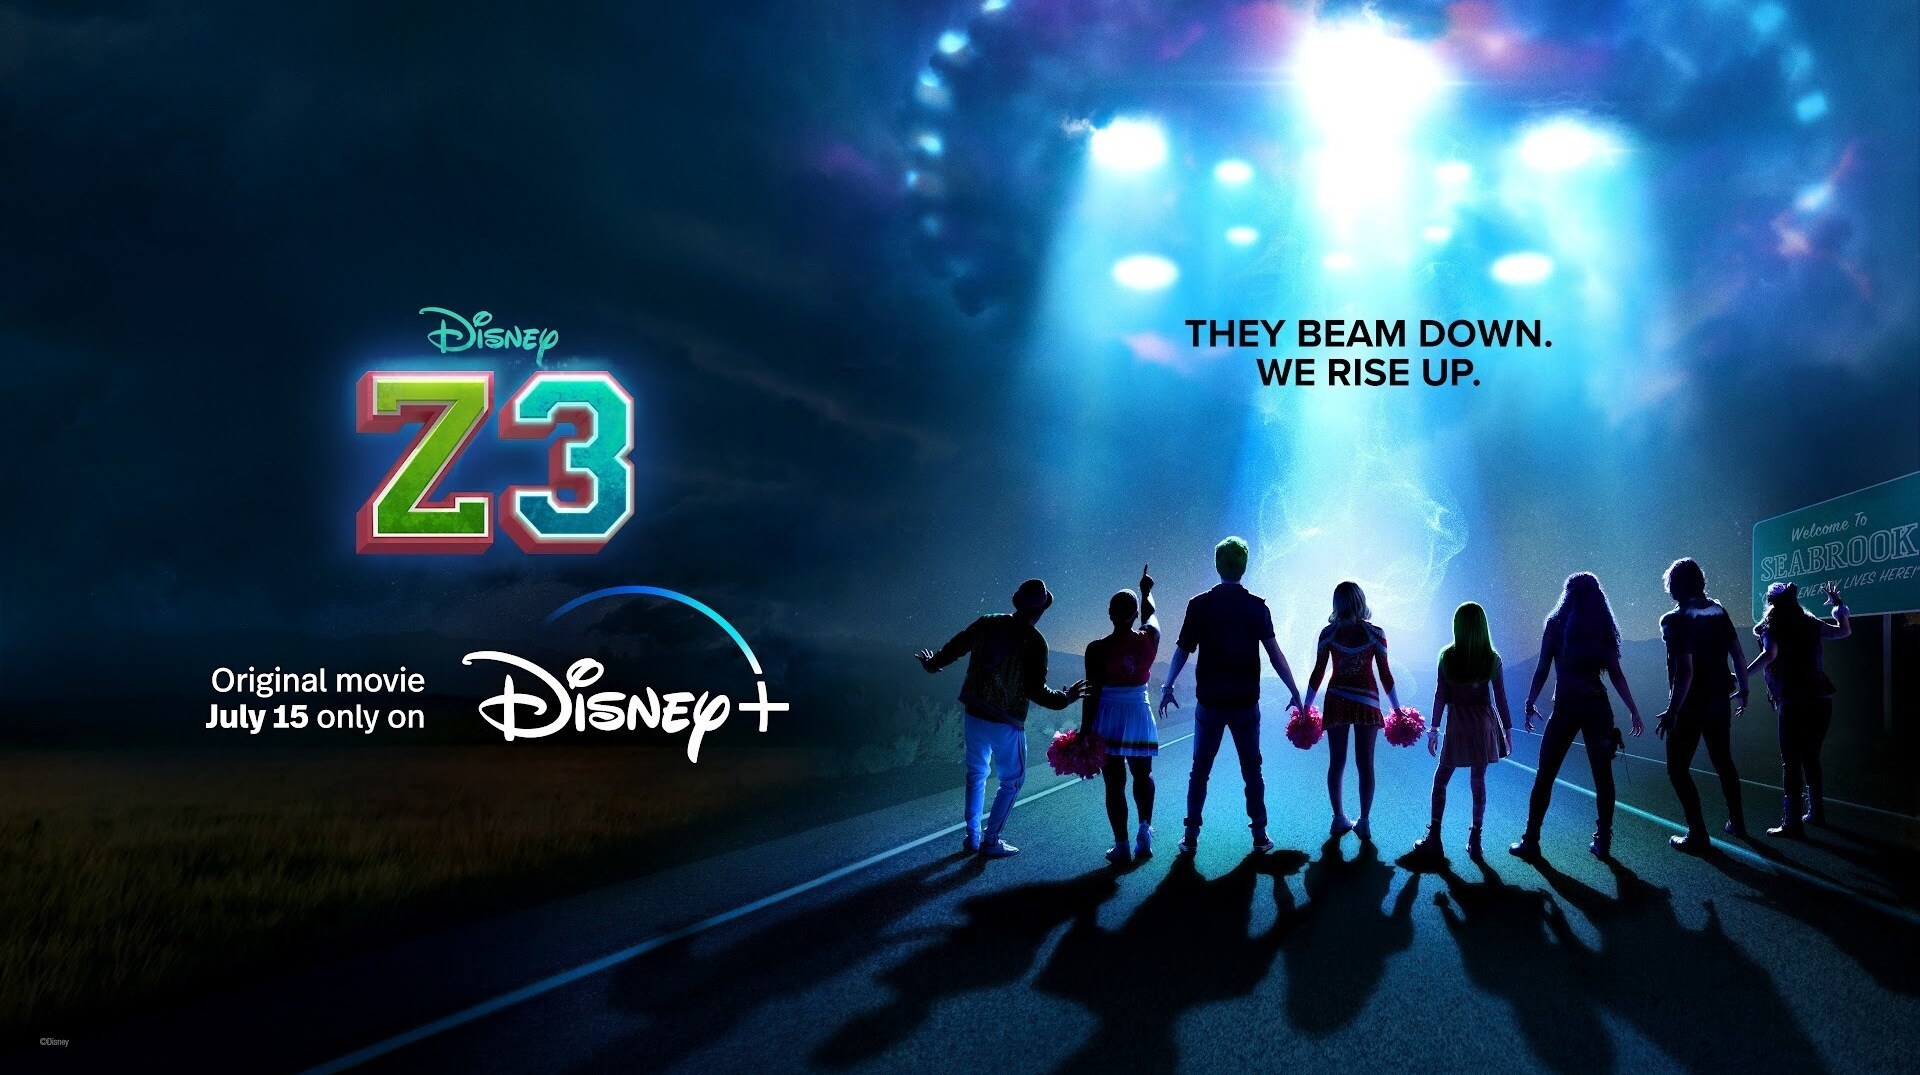 Zombies 3 Adds Three Members To Cast Of Disney Franchise